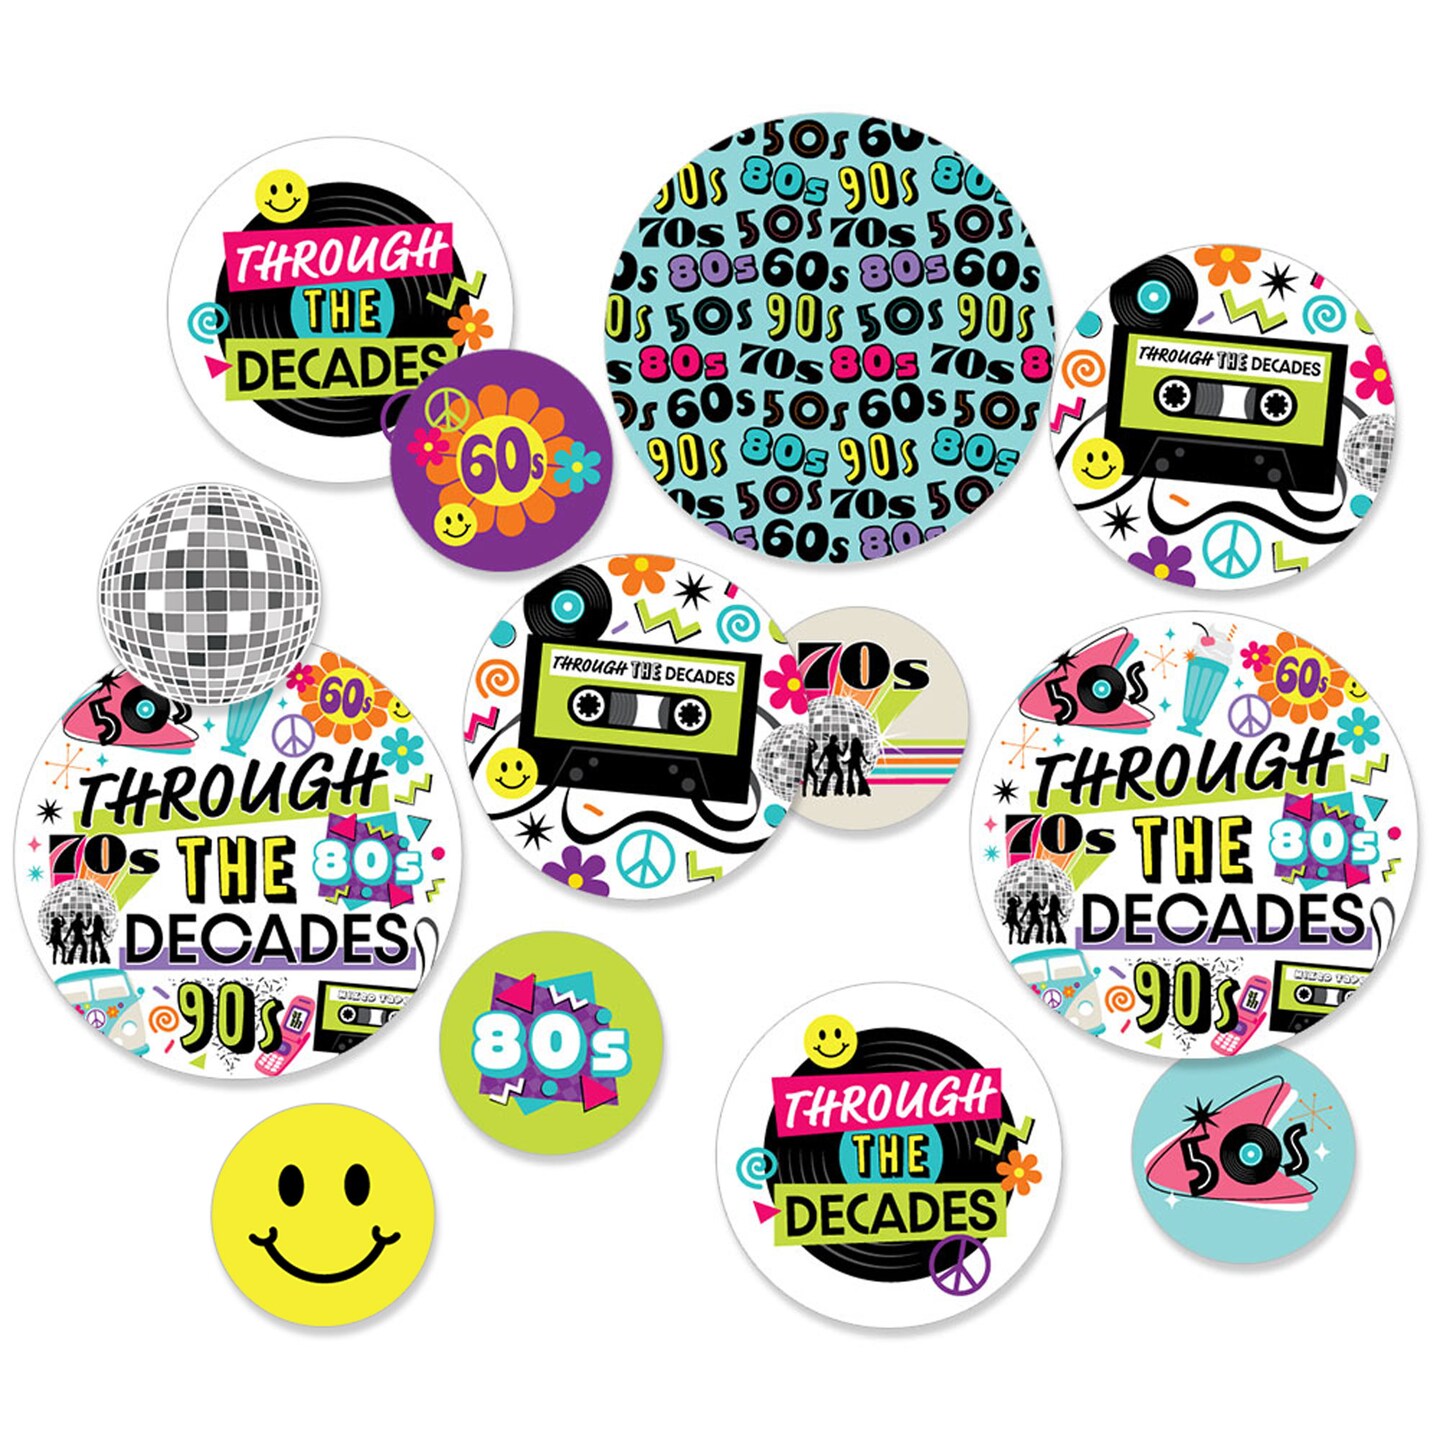 Big Dot of Happiness Through the Decades - 50s, 60s, 70s, 80s, and 90s Party Giant Circle Confetti - Party Decorations - Large Confetti 27 Count